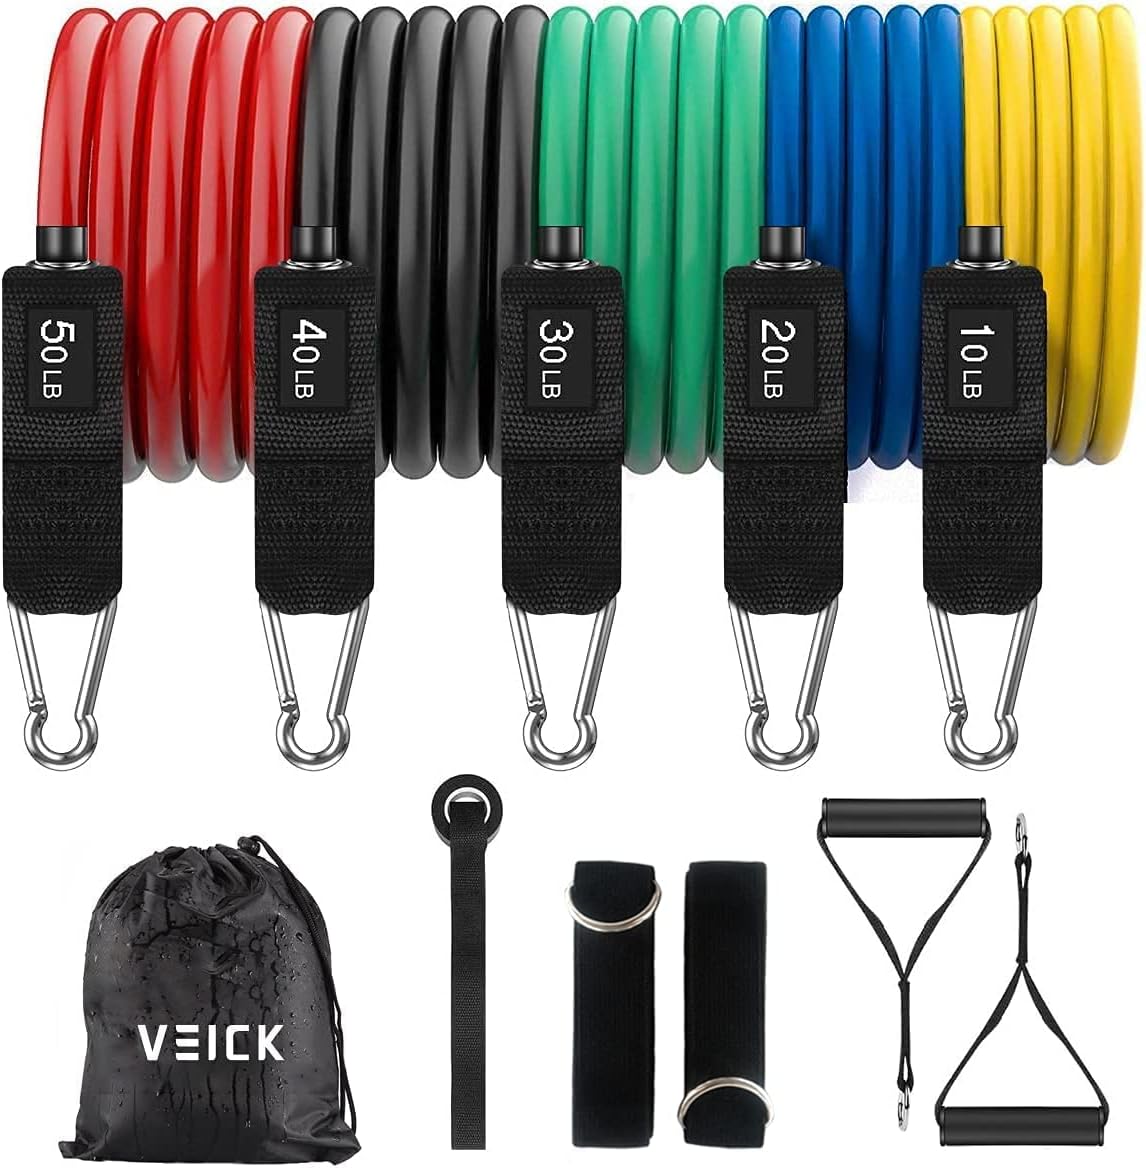 VEICK Resistance Bands Set with Handles